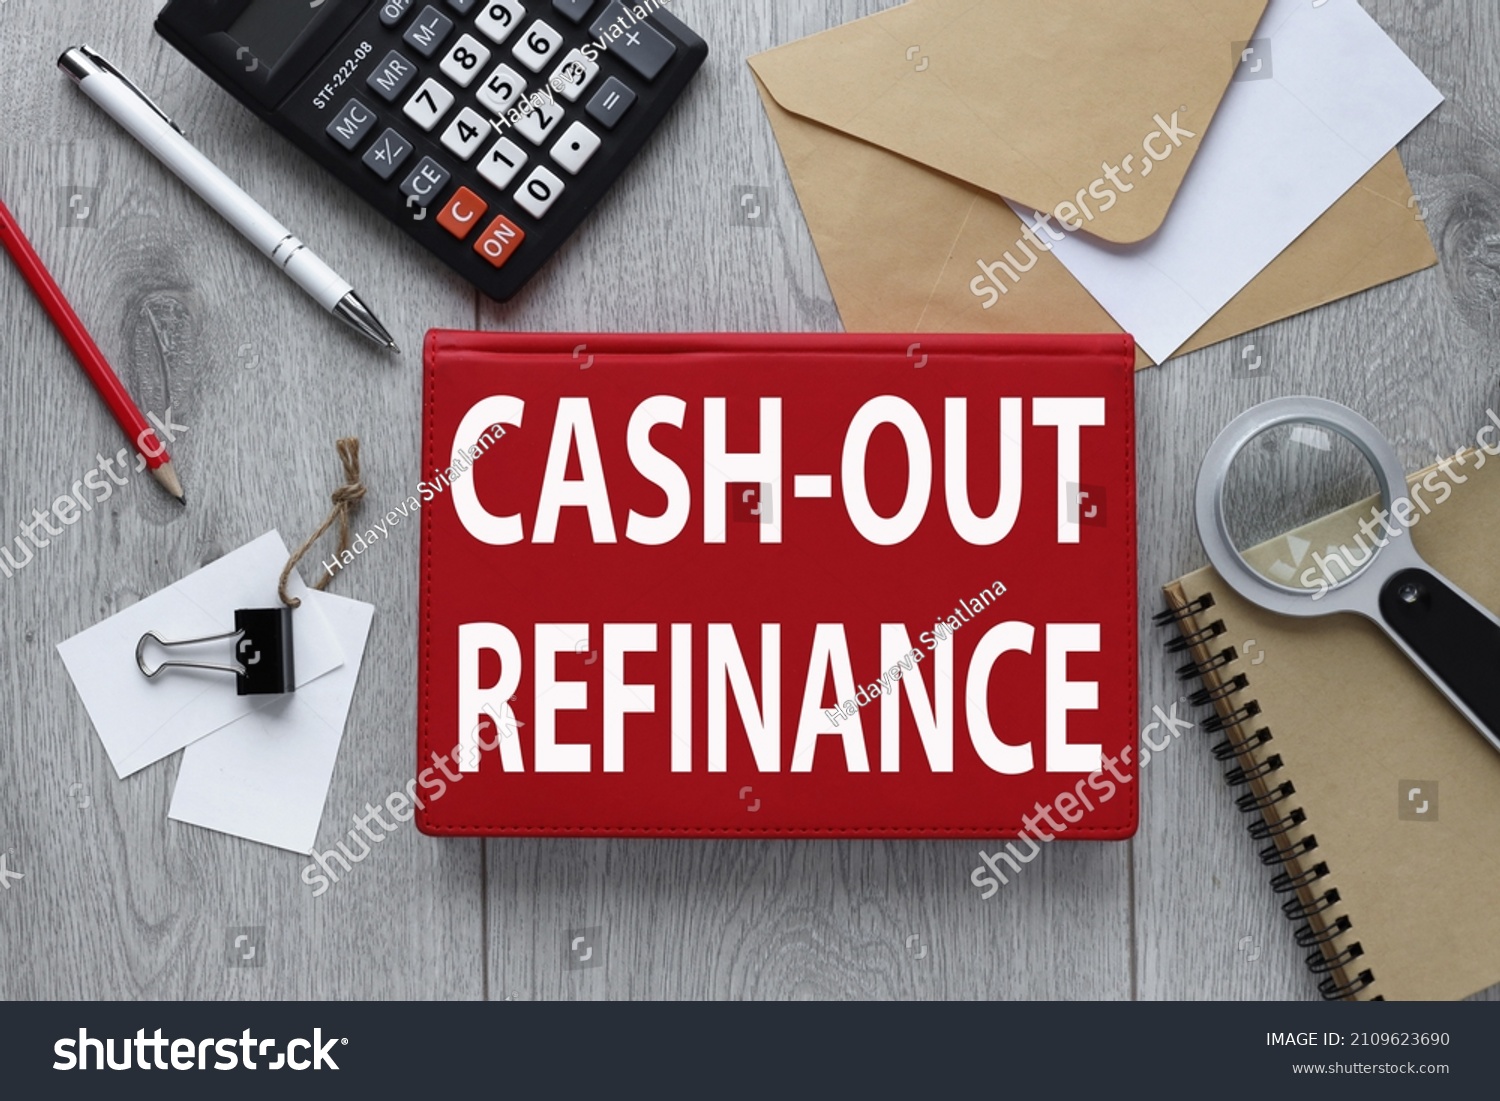 CASH-OUT REFINANCE red notepad on wood background with envelope and calculator #2109623690